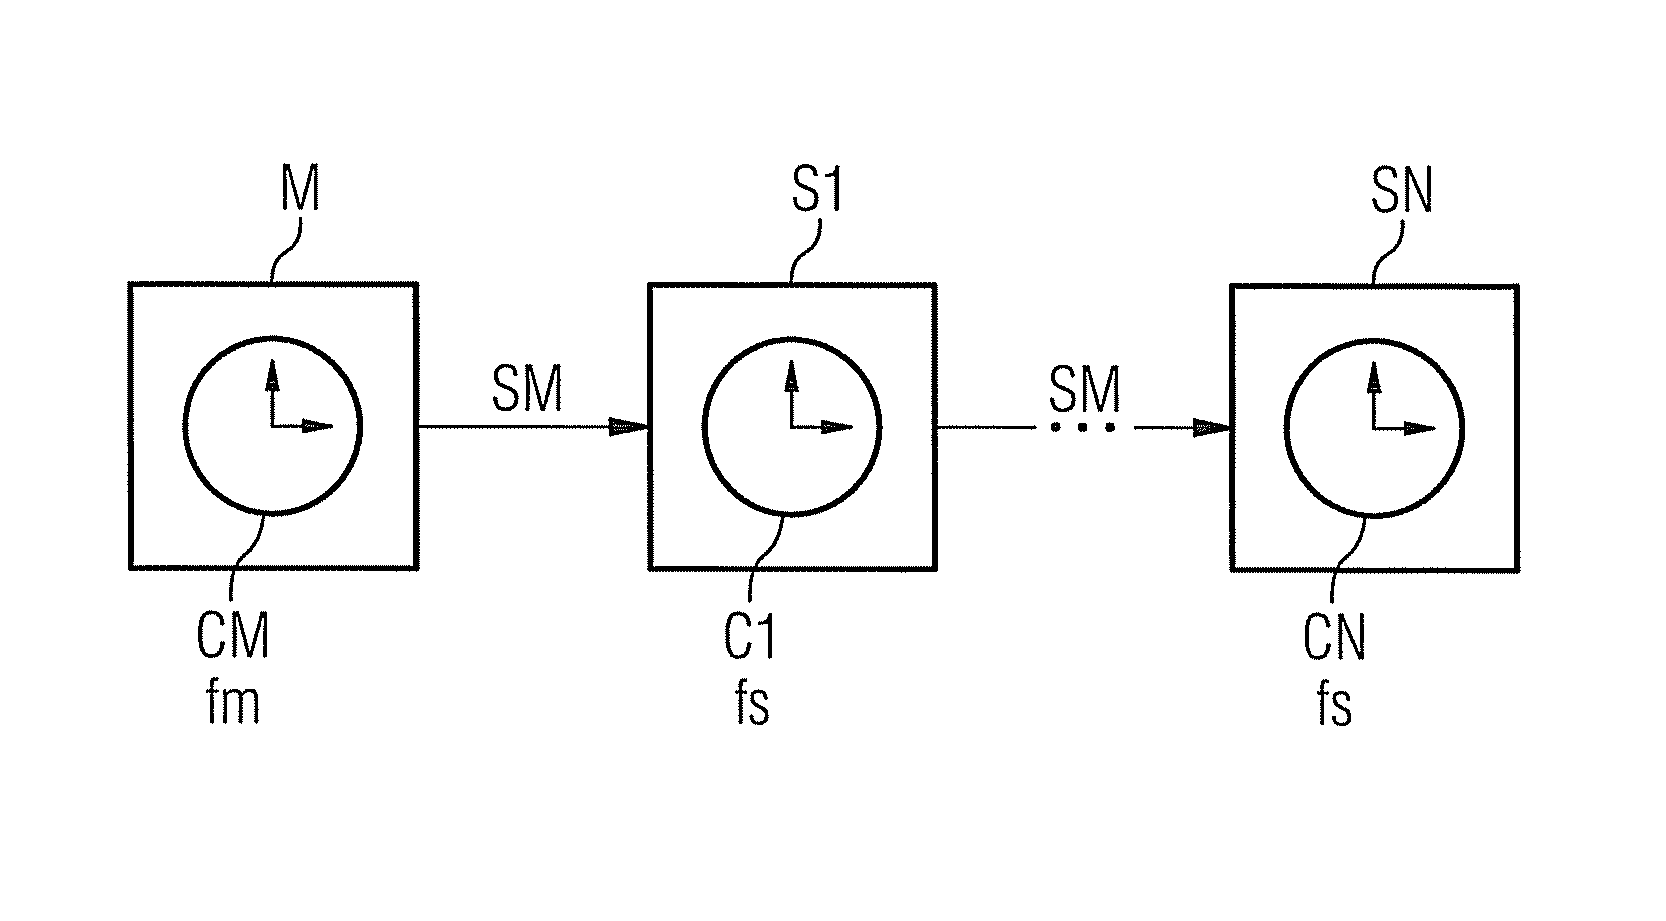 Method for transmitting synchronization messages in a communication network